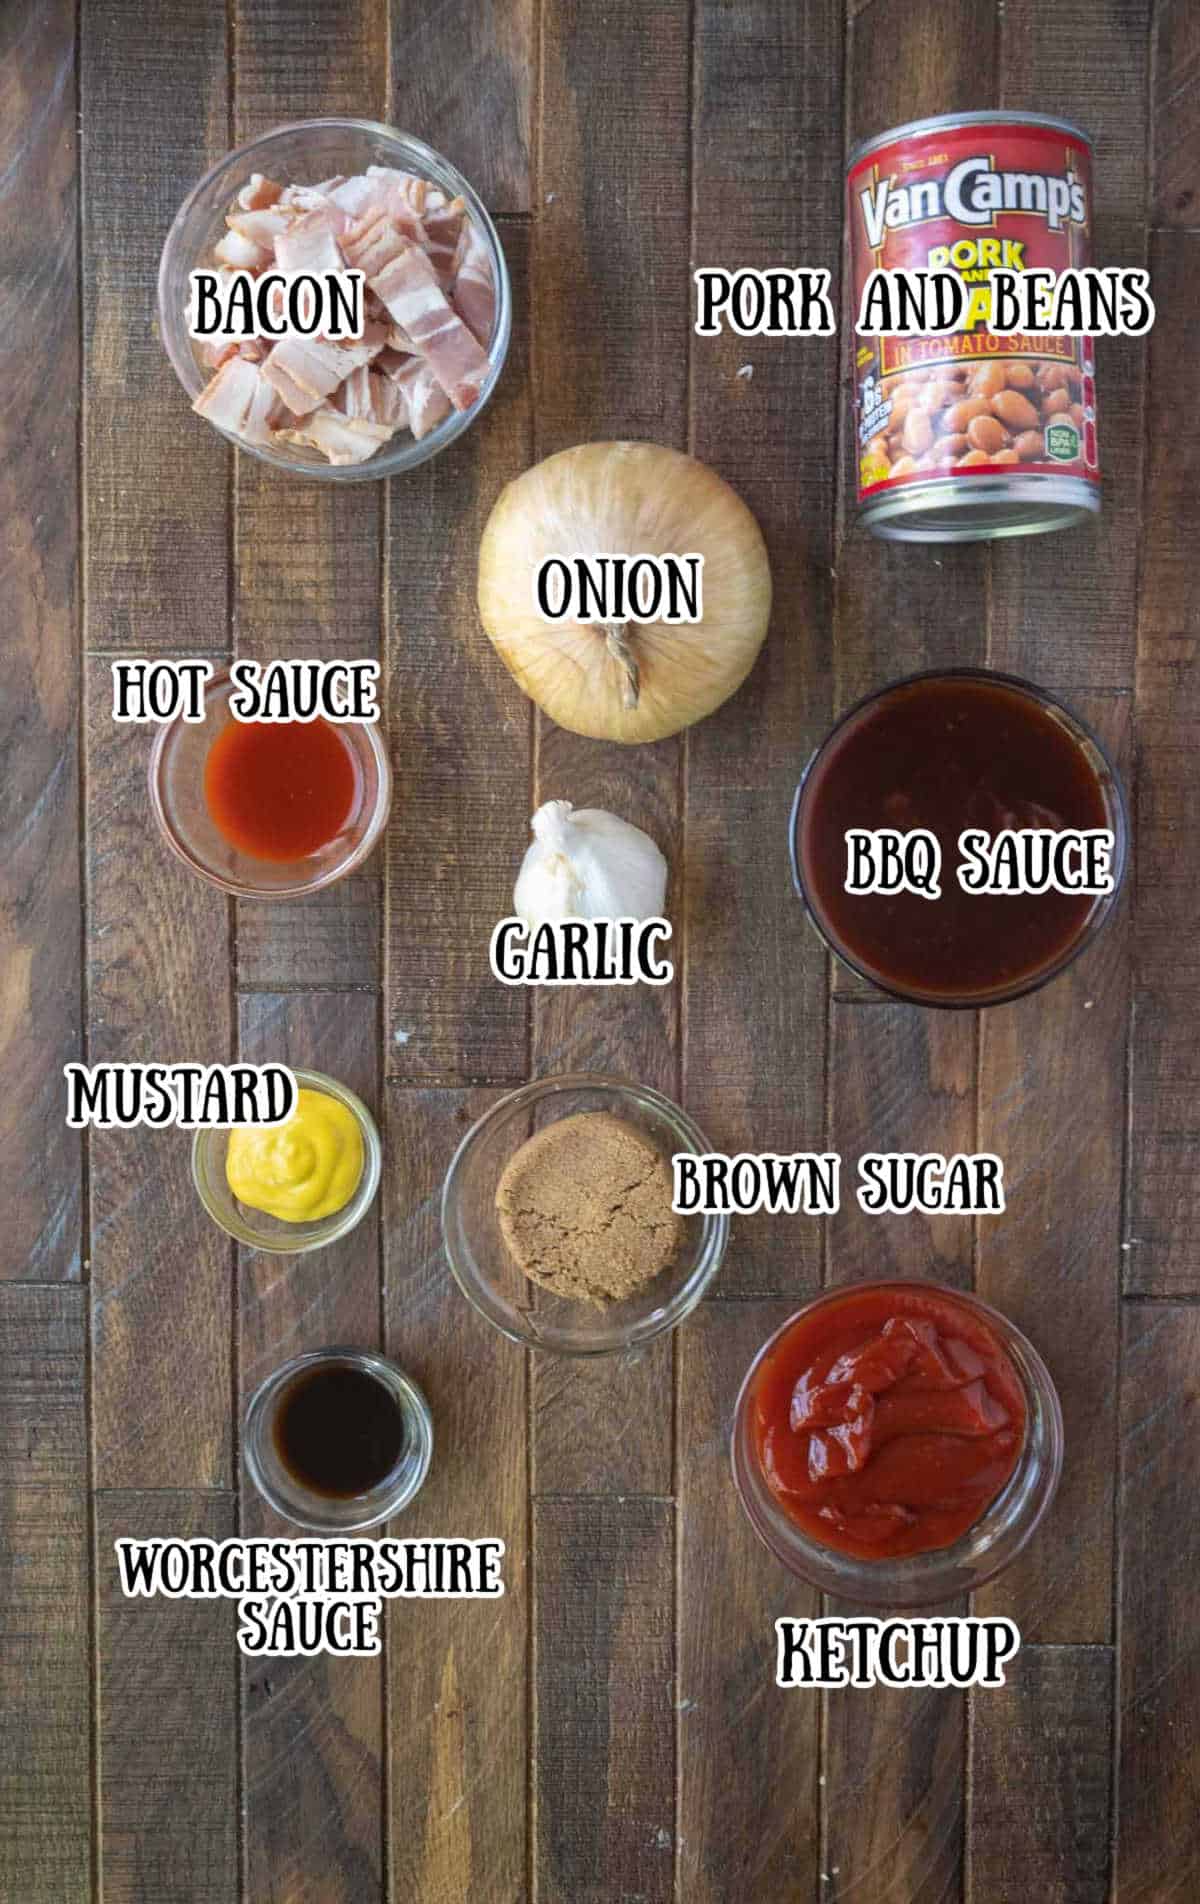 All the ingredients needed for these baked beans.